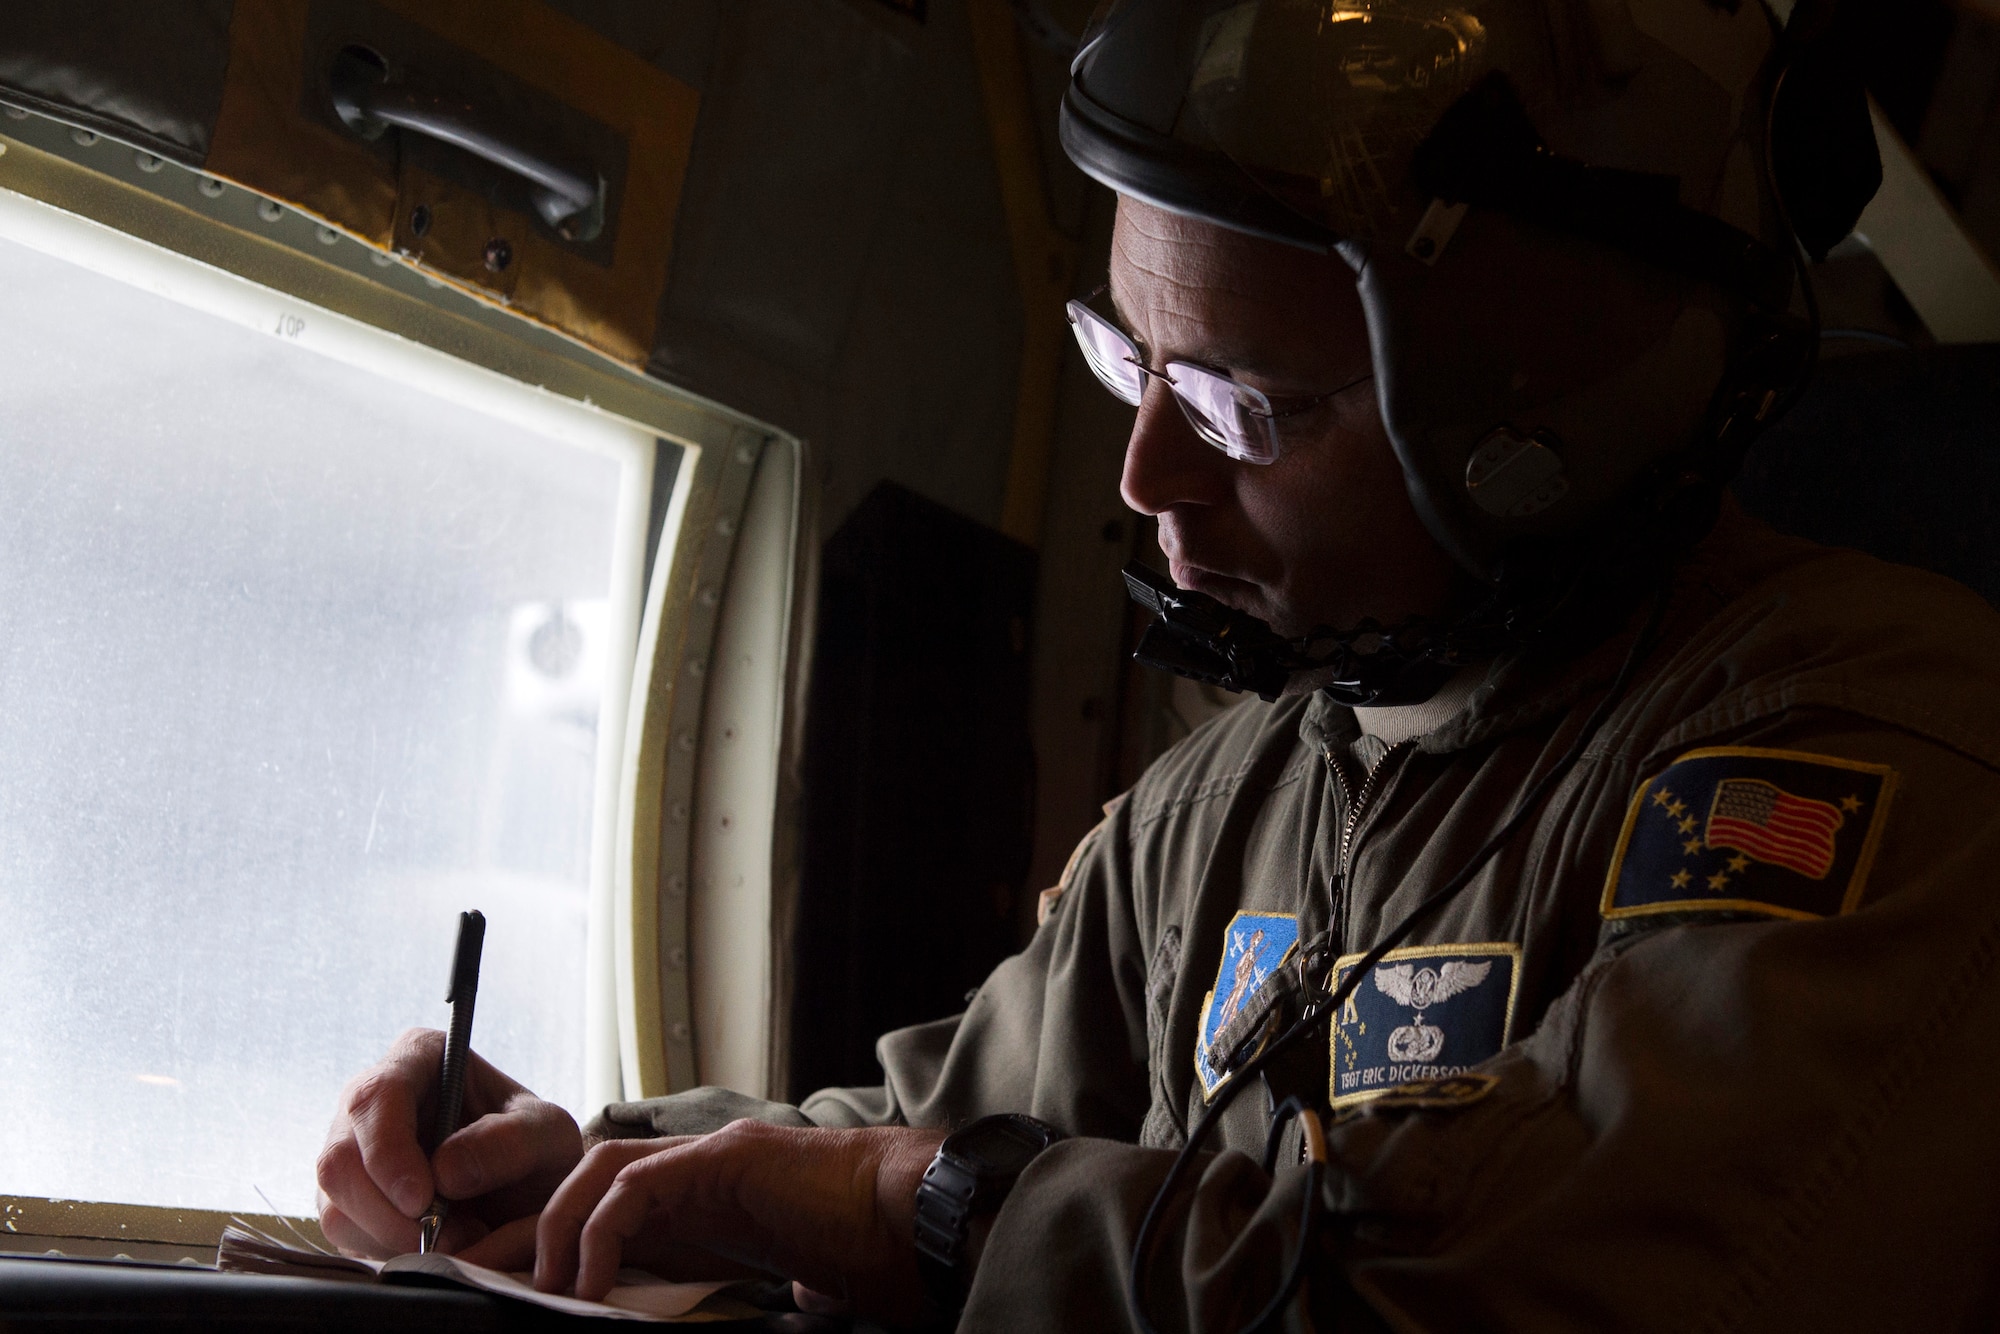 U.S. Air Force Tech. Sgt. Eric Dickerson, a loadmaster assigned to the 211th Rescue Squadron, Alaska Air National Guard, creates a timeline for a HC-130J Combat King II’s simulated search and rescue over Alaska, Jan. 21, 2021, during Operation Noble Defender. Operation Noble Defender is a North American Air Defense Command air-defense operation which allows dynamic training for operational readiness in an arctic environment.